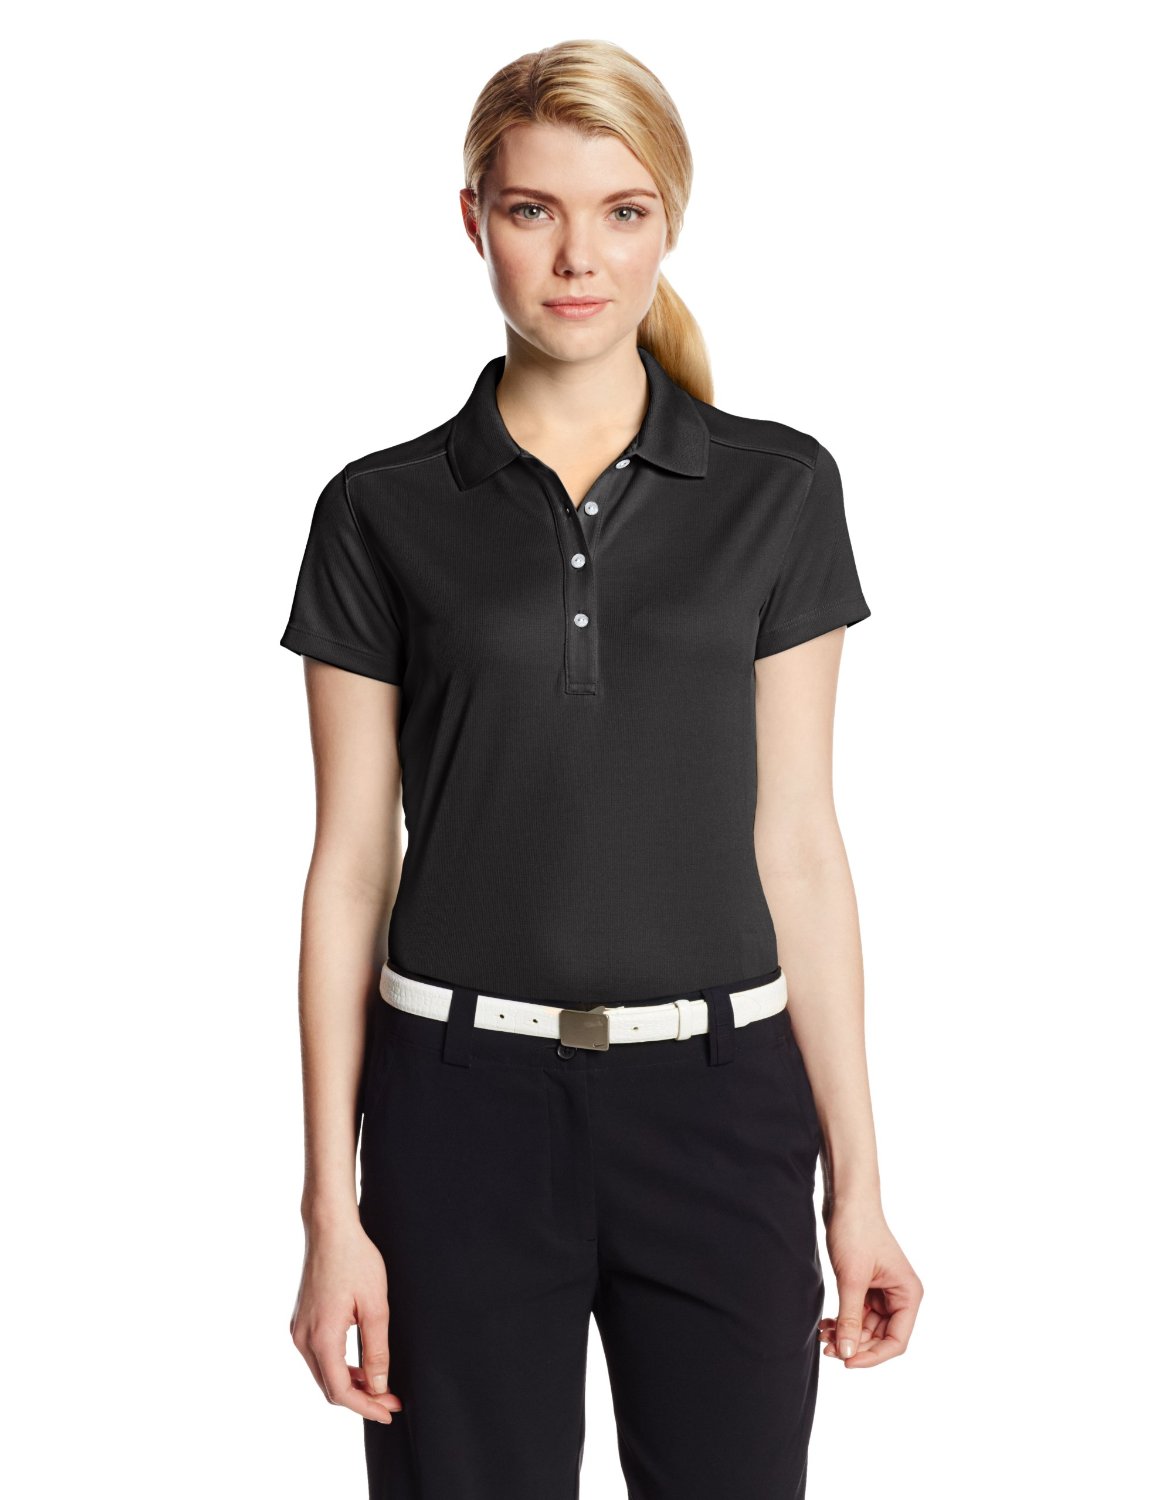 Callaway Solid Double Knit Short Sleeve Golf Polo Shirts